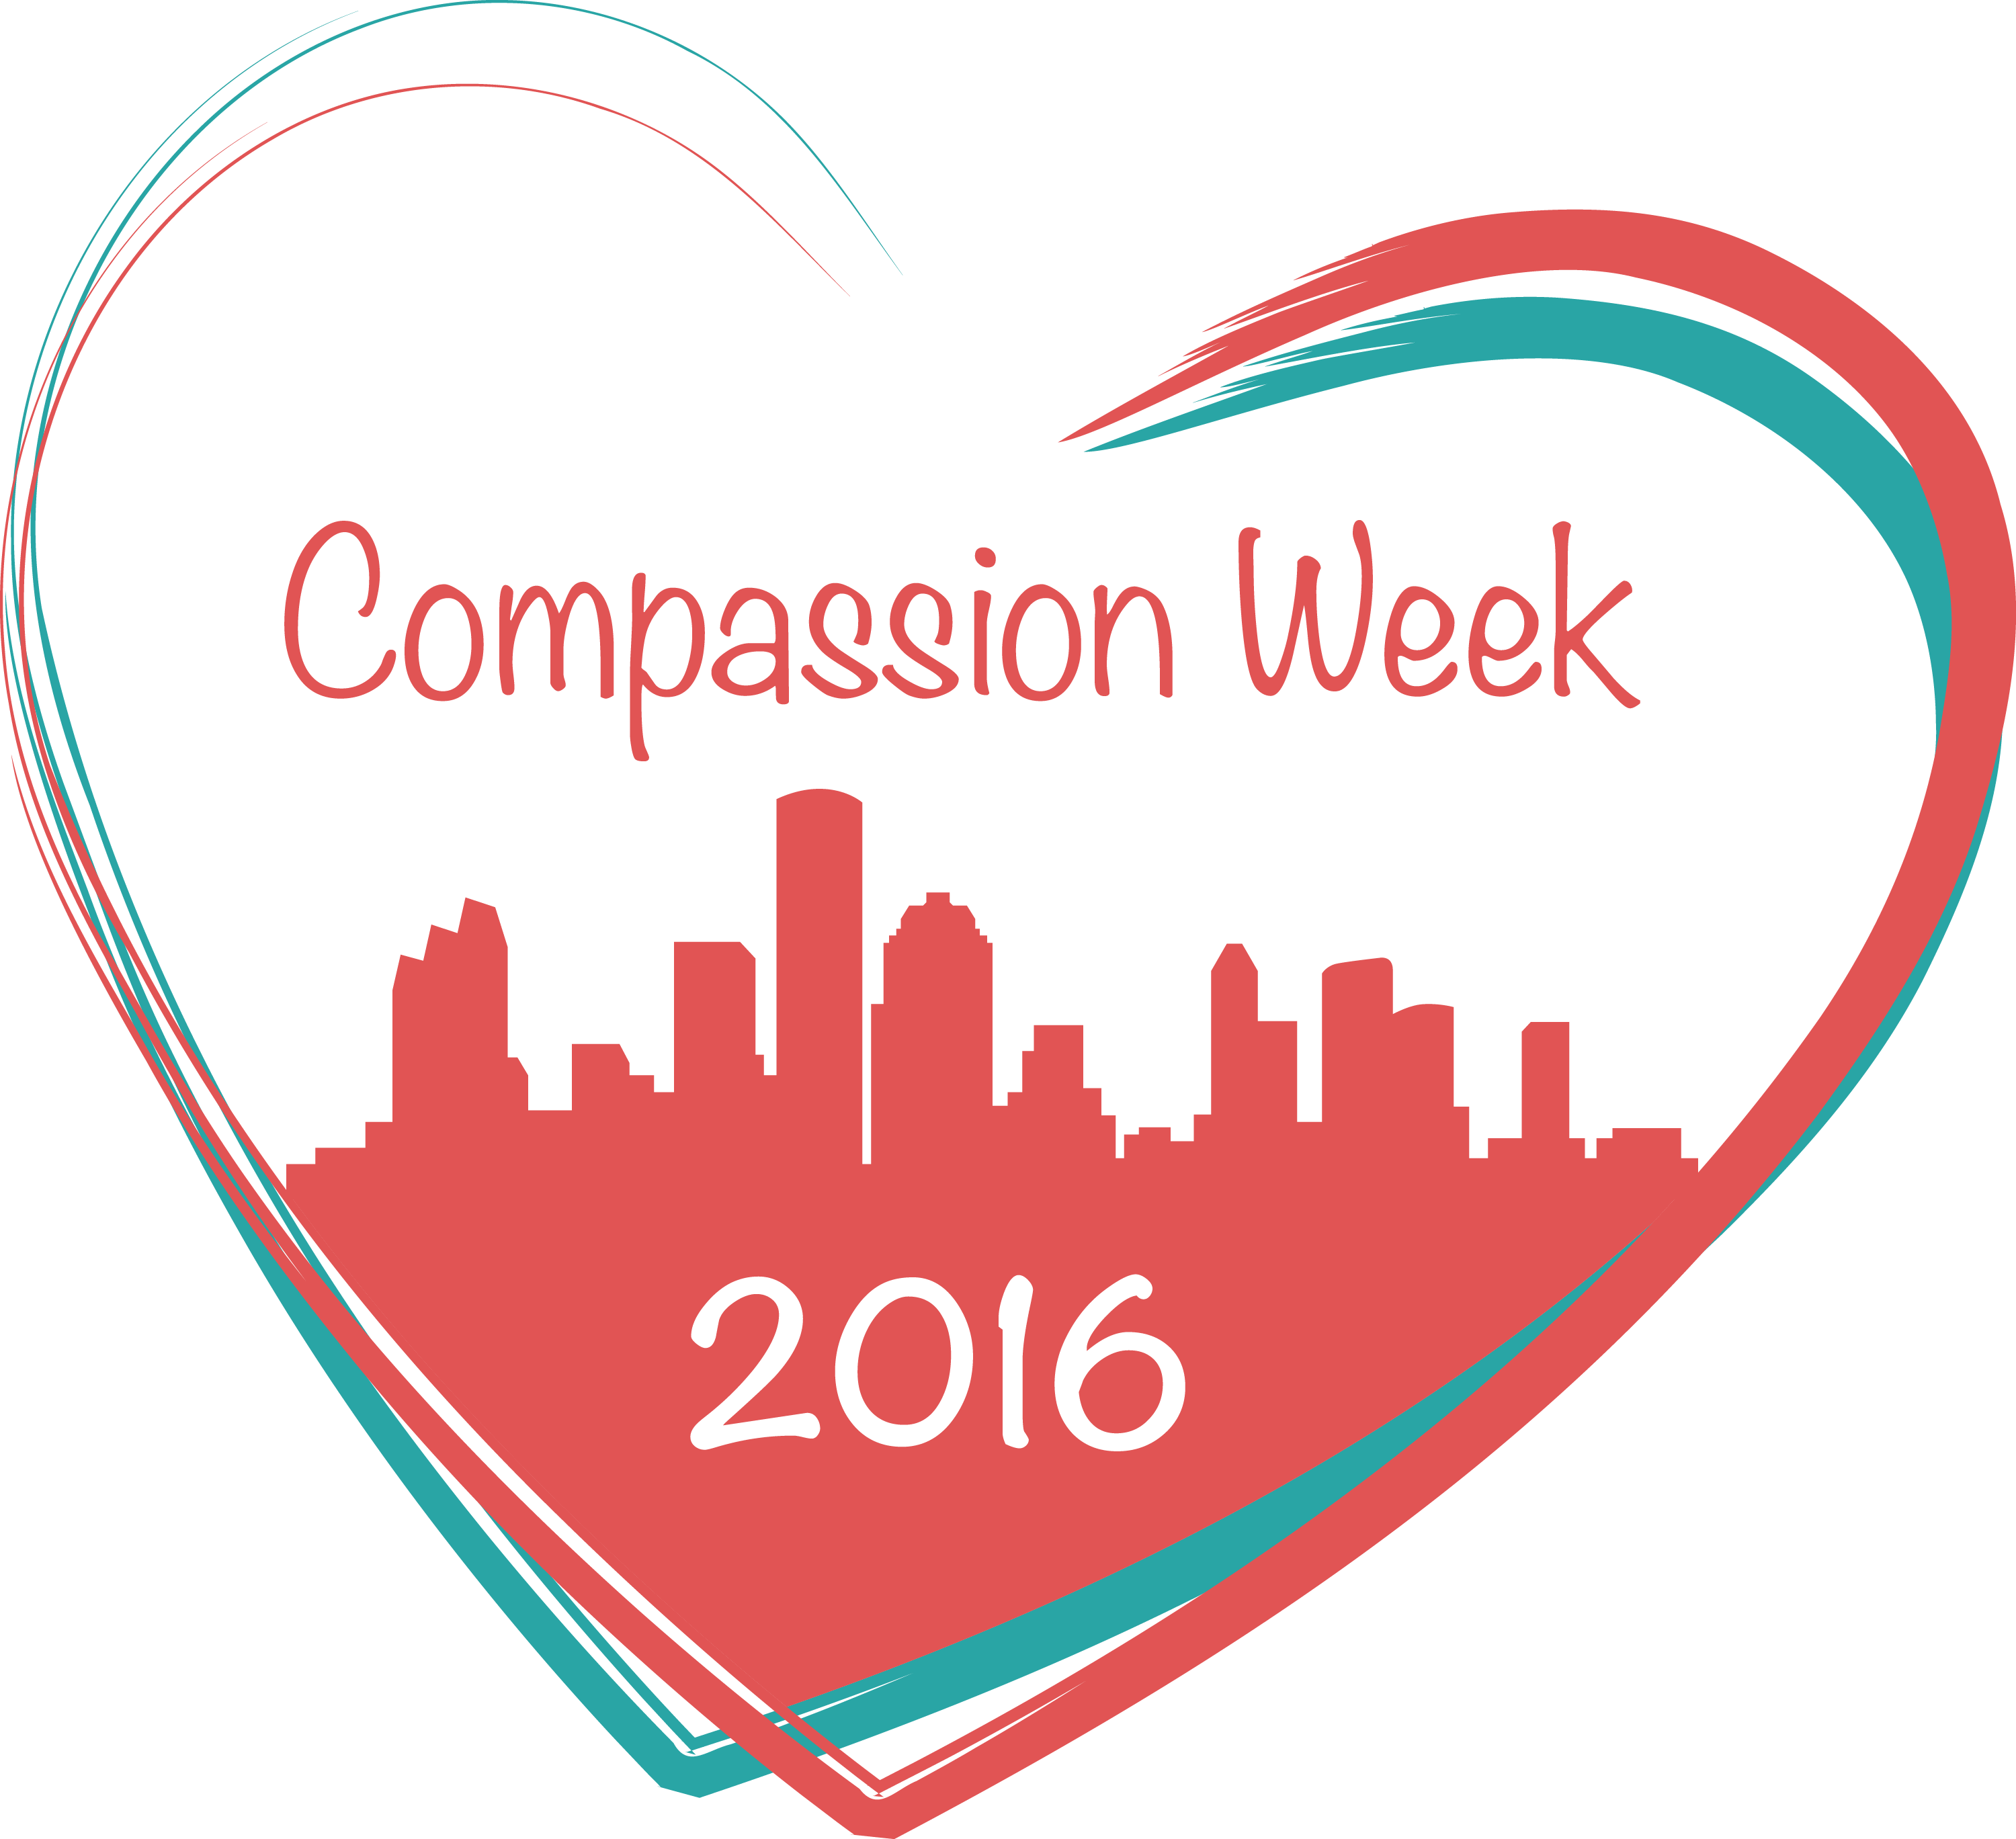 Image Compassion Week 2016 Opening Ceremony